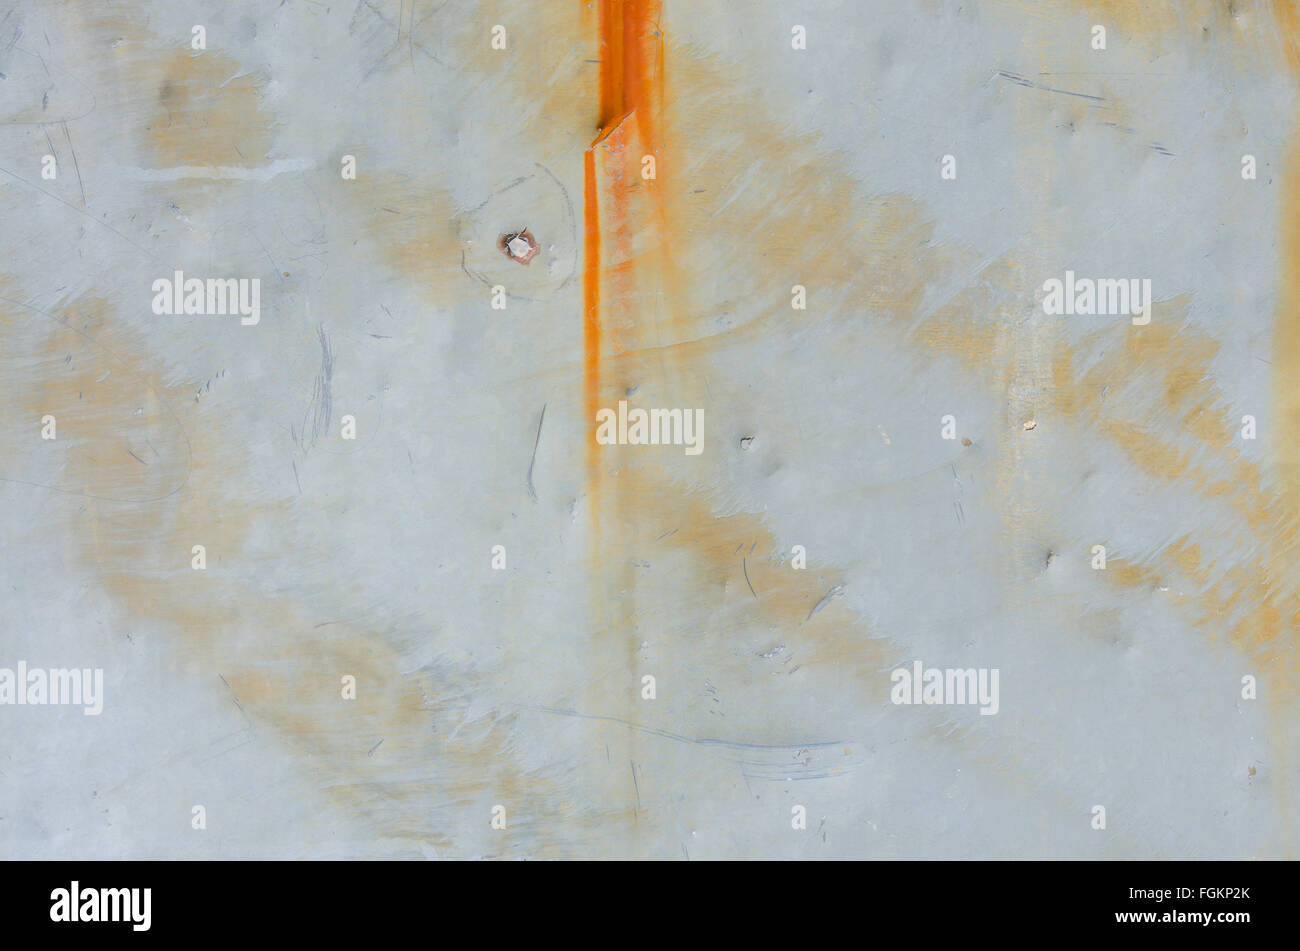 Rusty streaks and bullet hole on sheet metal background image Stock Photo